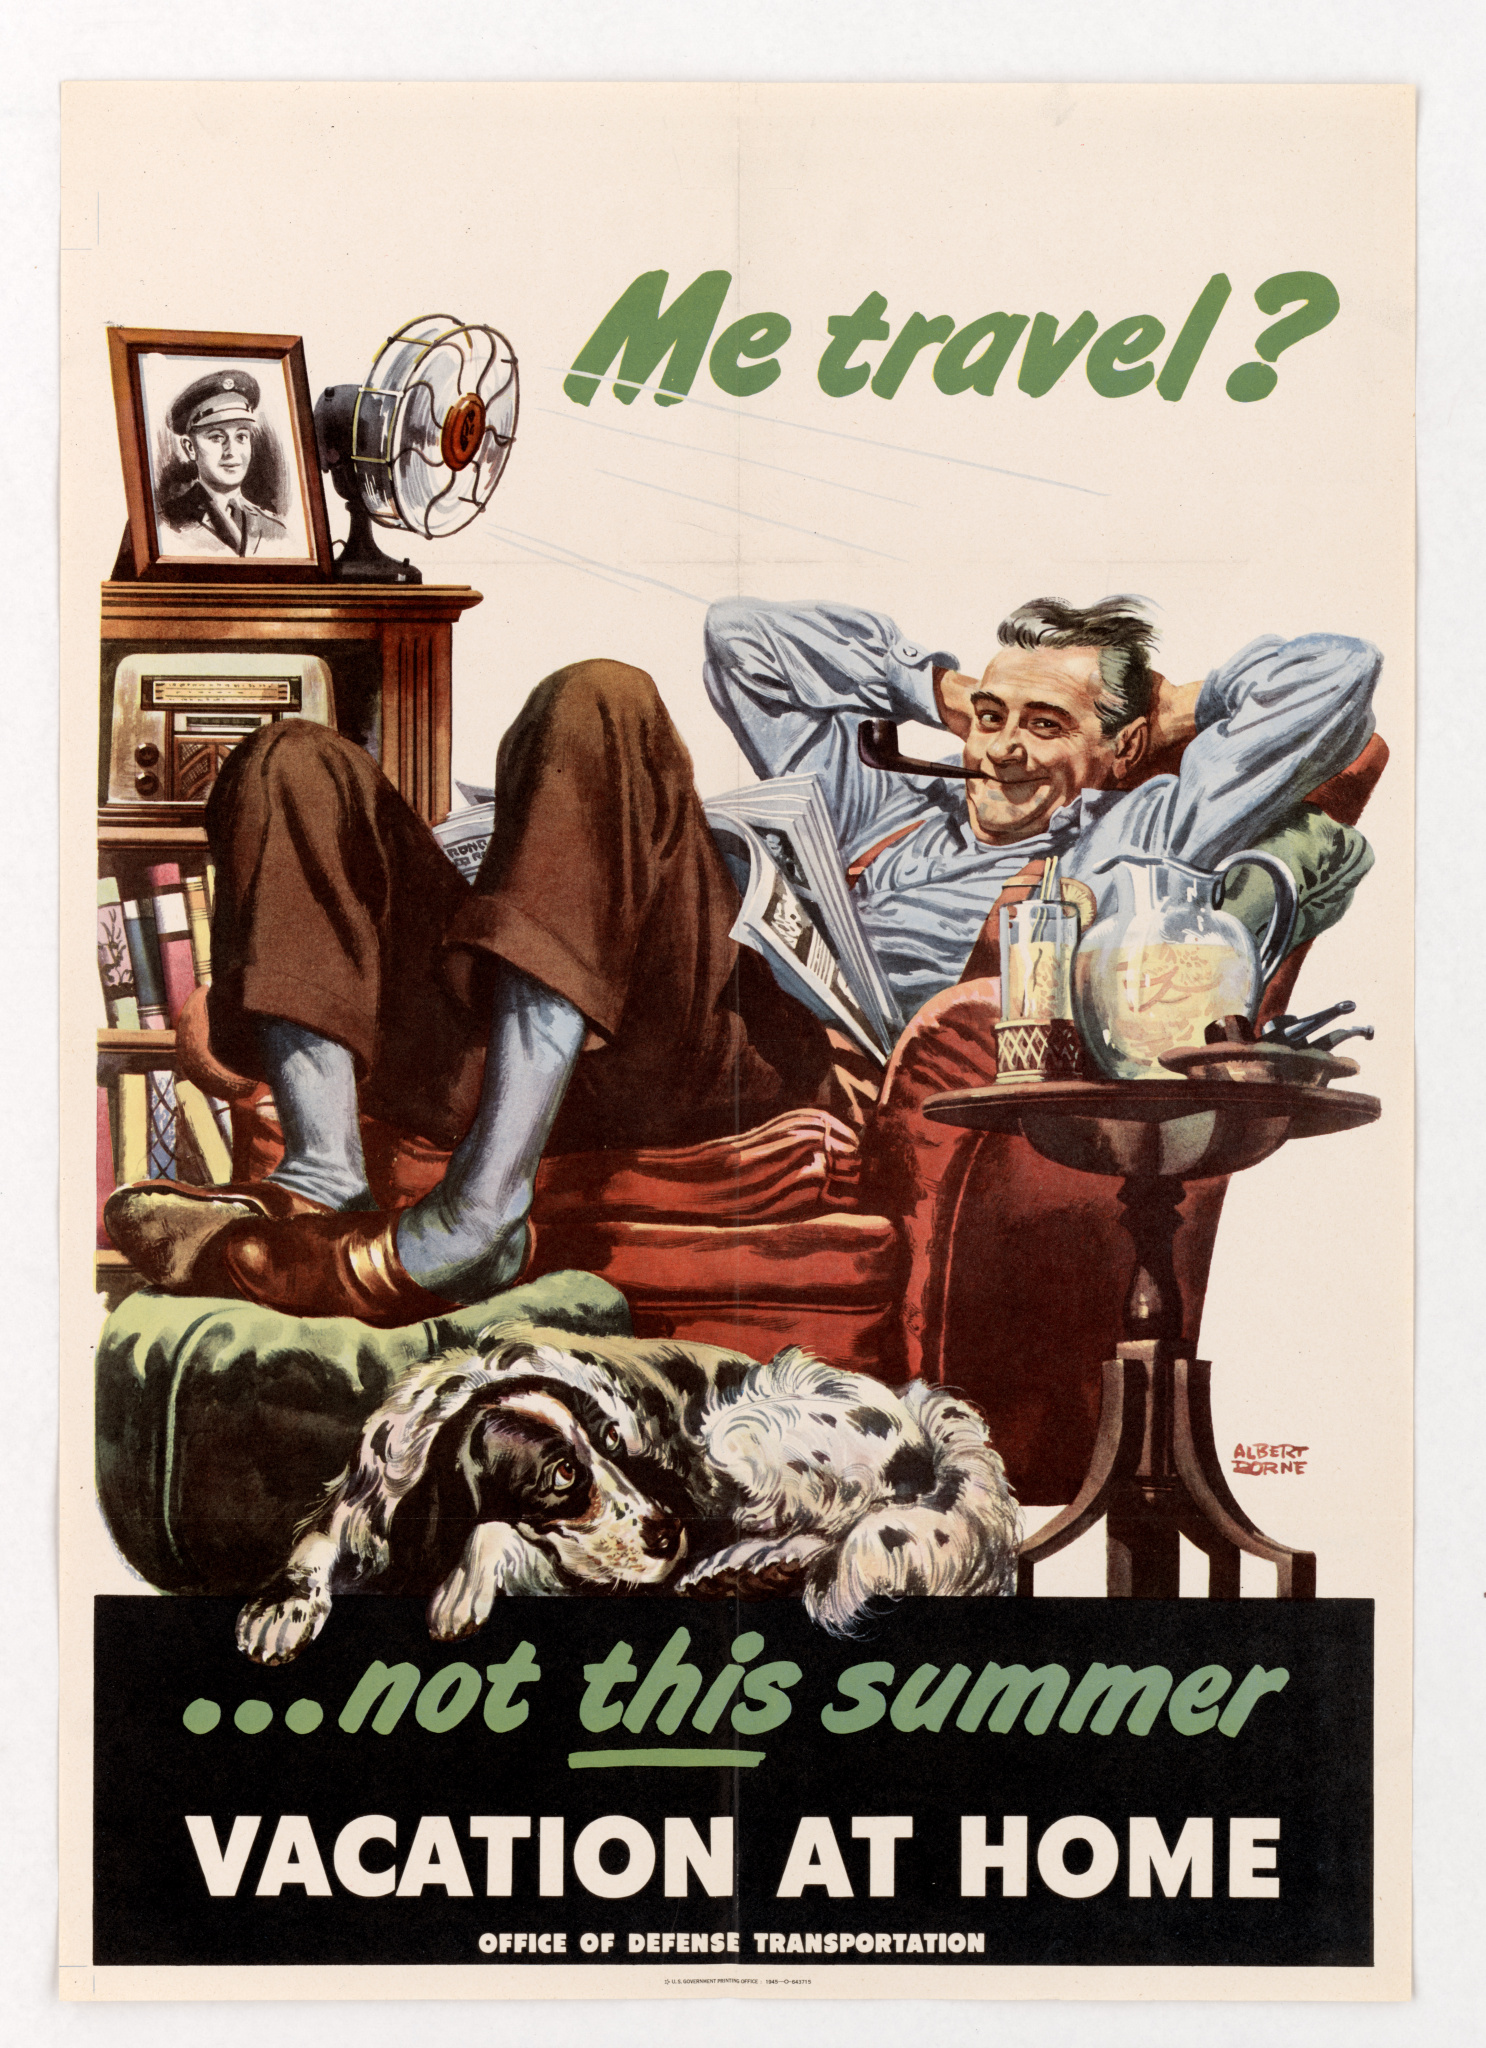 World War II poster: Me travel? ... not this summer. Vacation at home.